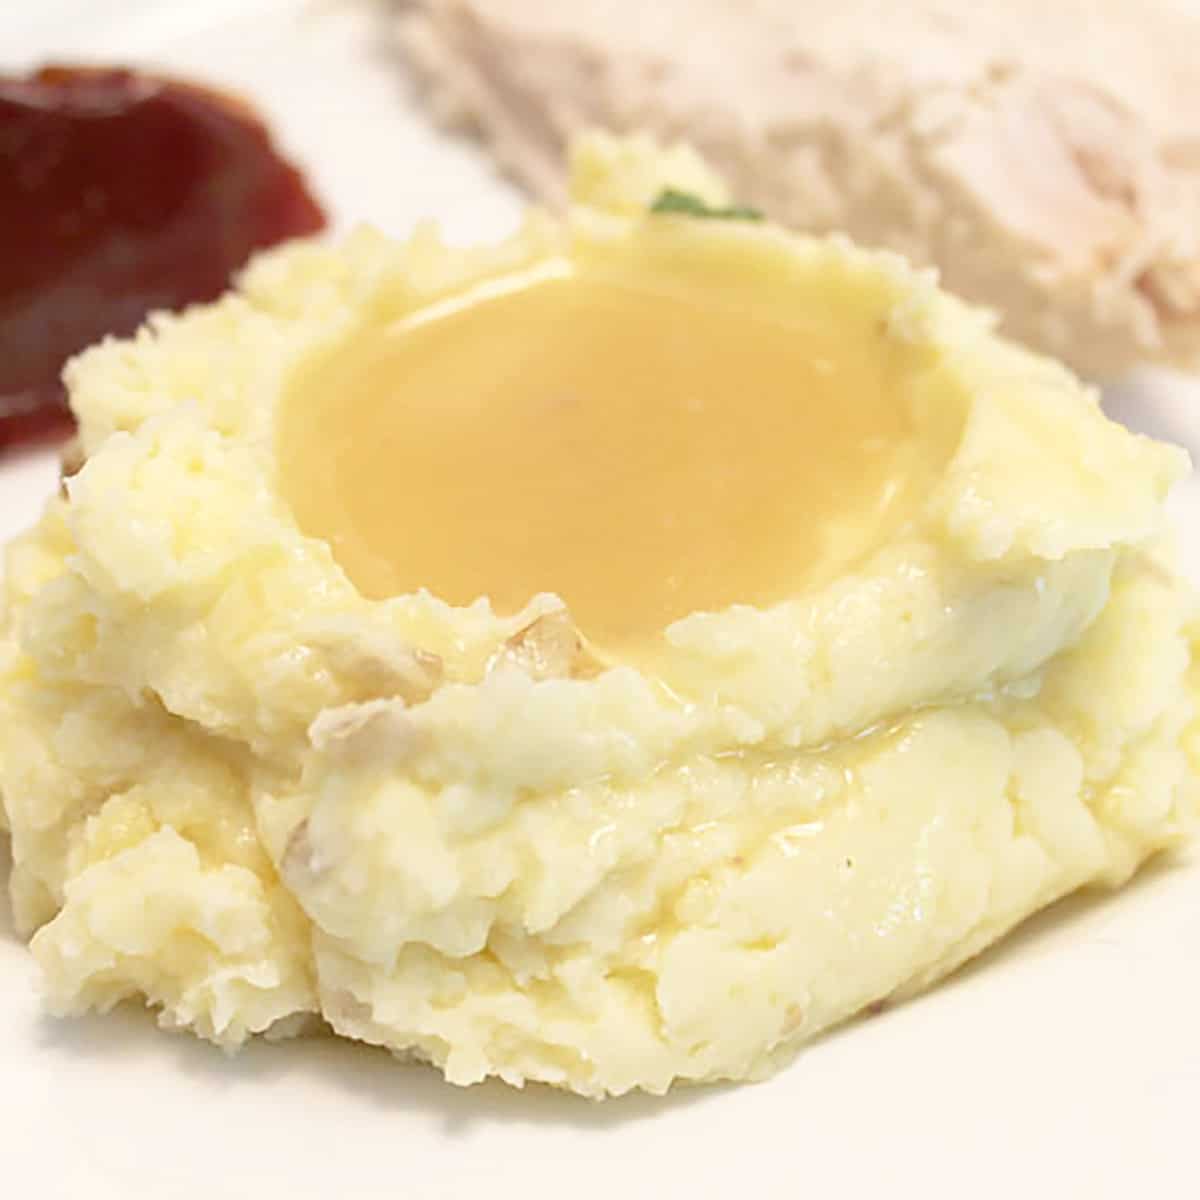 Mashed potatoes with gravy.